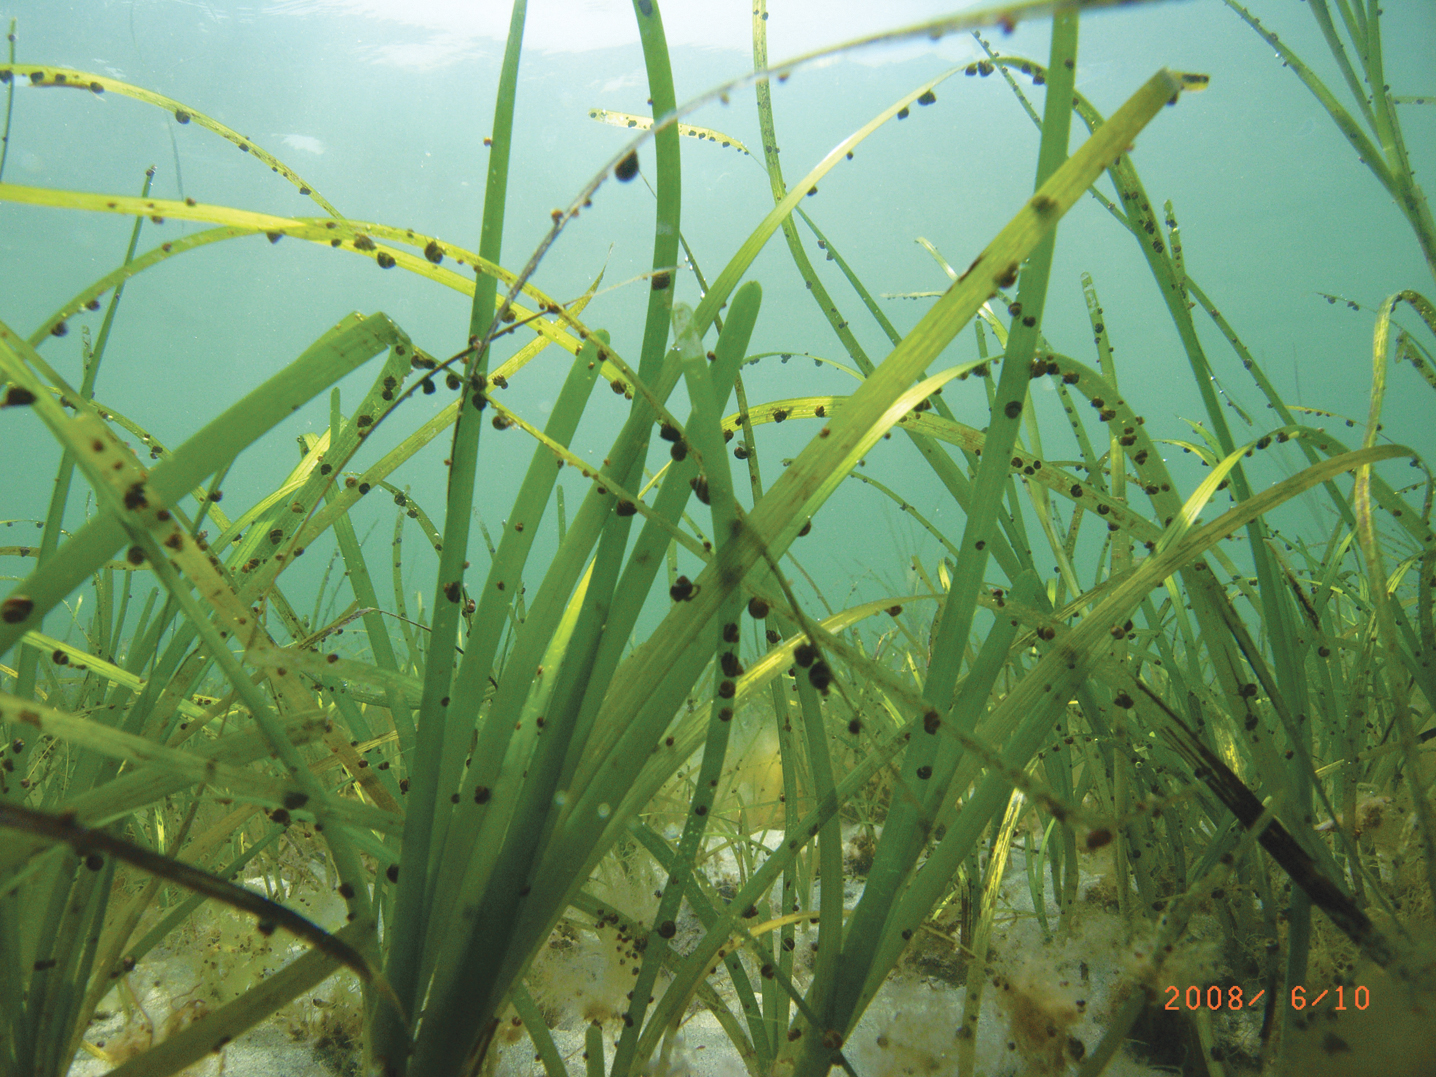 Sunlight penetrating the surface to the seafloor is needed for eelgrass to grow. Photo by Cornell Cooperative Extension Suffolk County Marine Program.